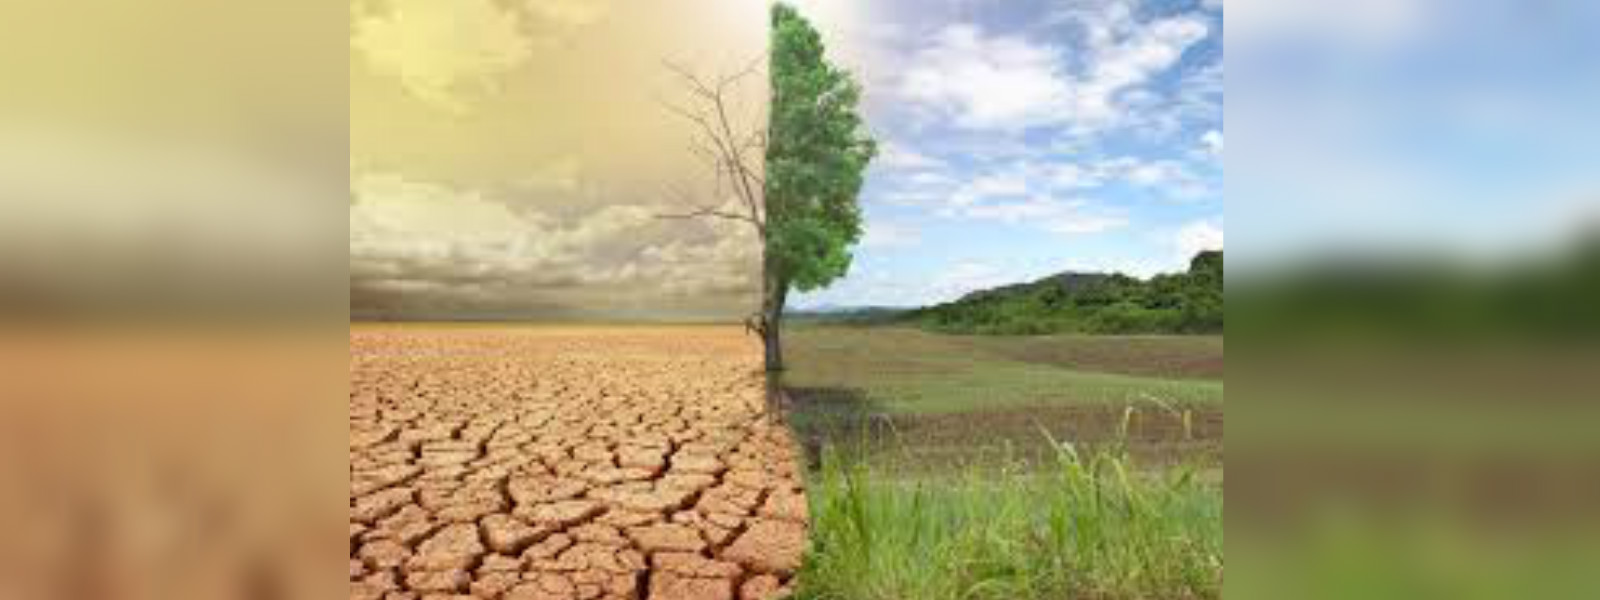 SL the 2nd most affected due to climate change 